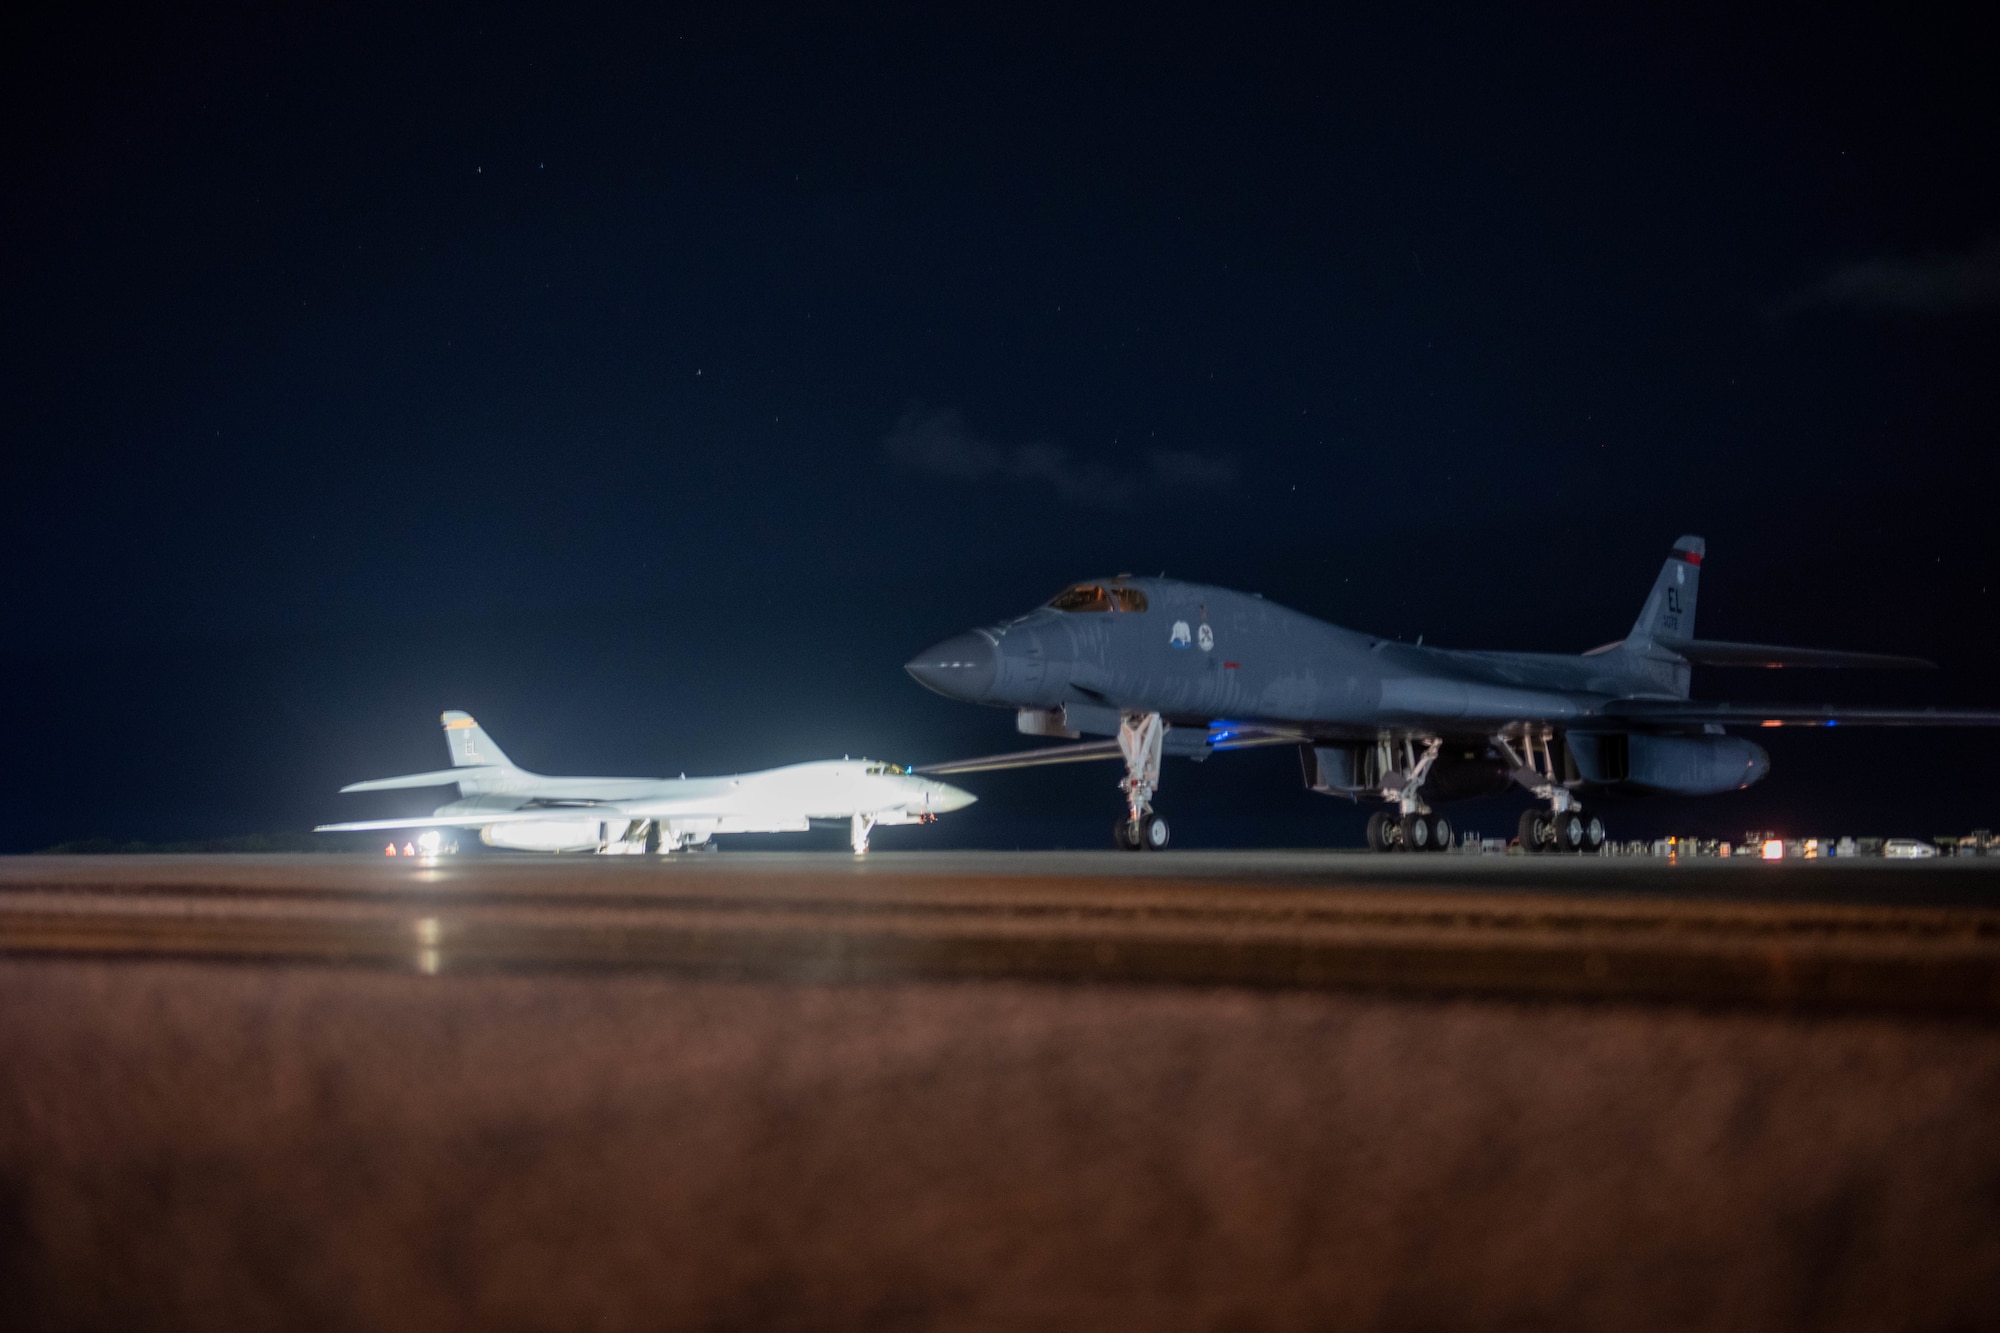 A U.S. Air Force B-1B Lancer, assigned to the 34th Bomb Squadron, Ellsworth Air Force Base, taxis on Andersen Air Force Base, Guam, after arriving for a Bomber Task Force mission June 3, 2022.